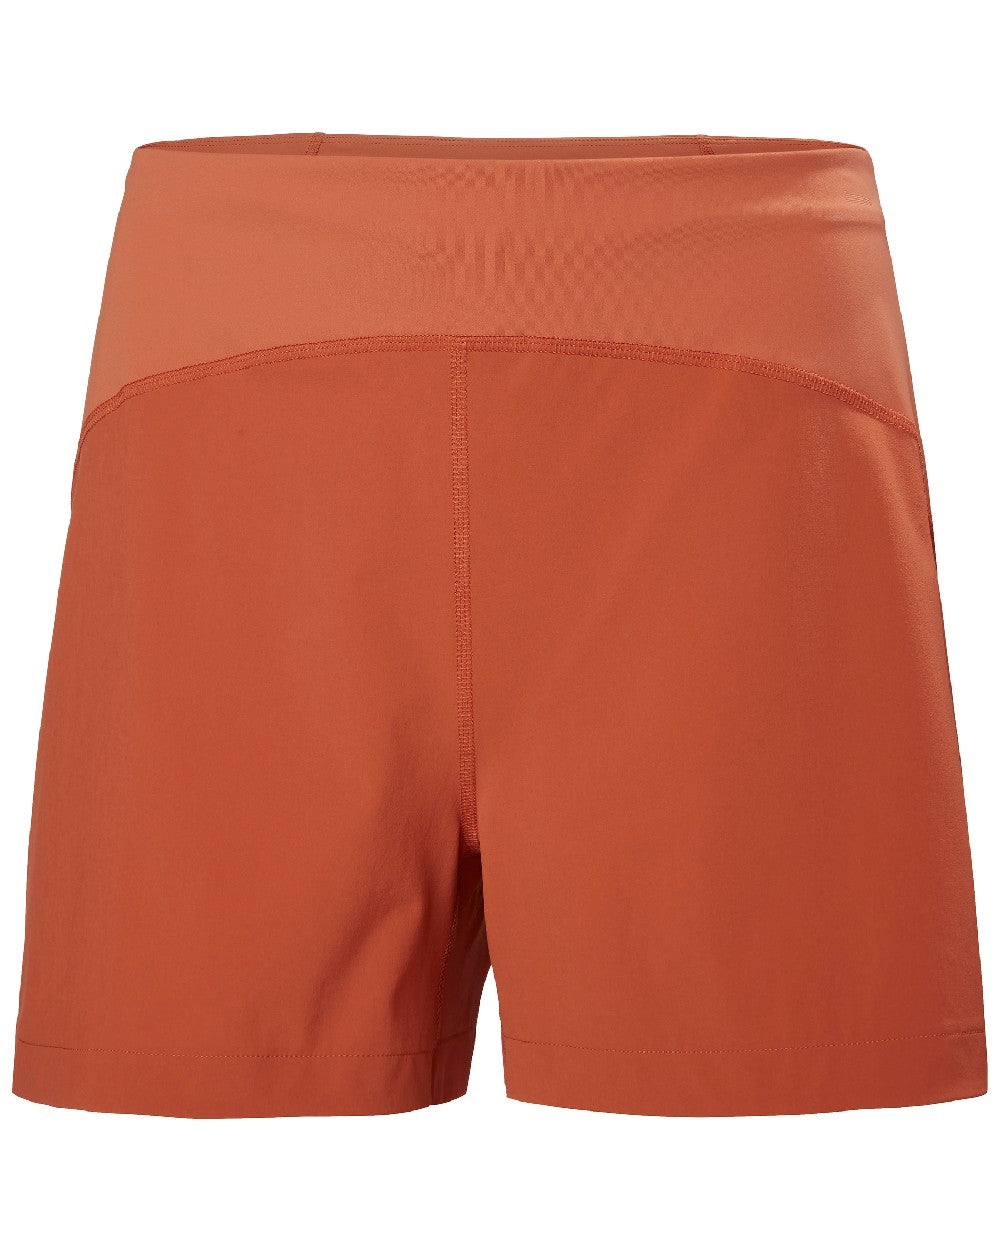 Canyon coloured Helly Hansen Womens HP Shorts on white background 